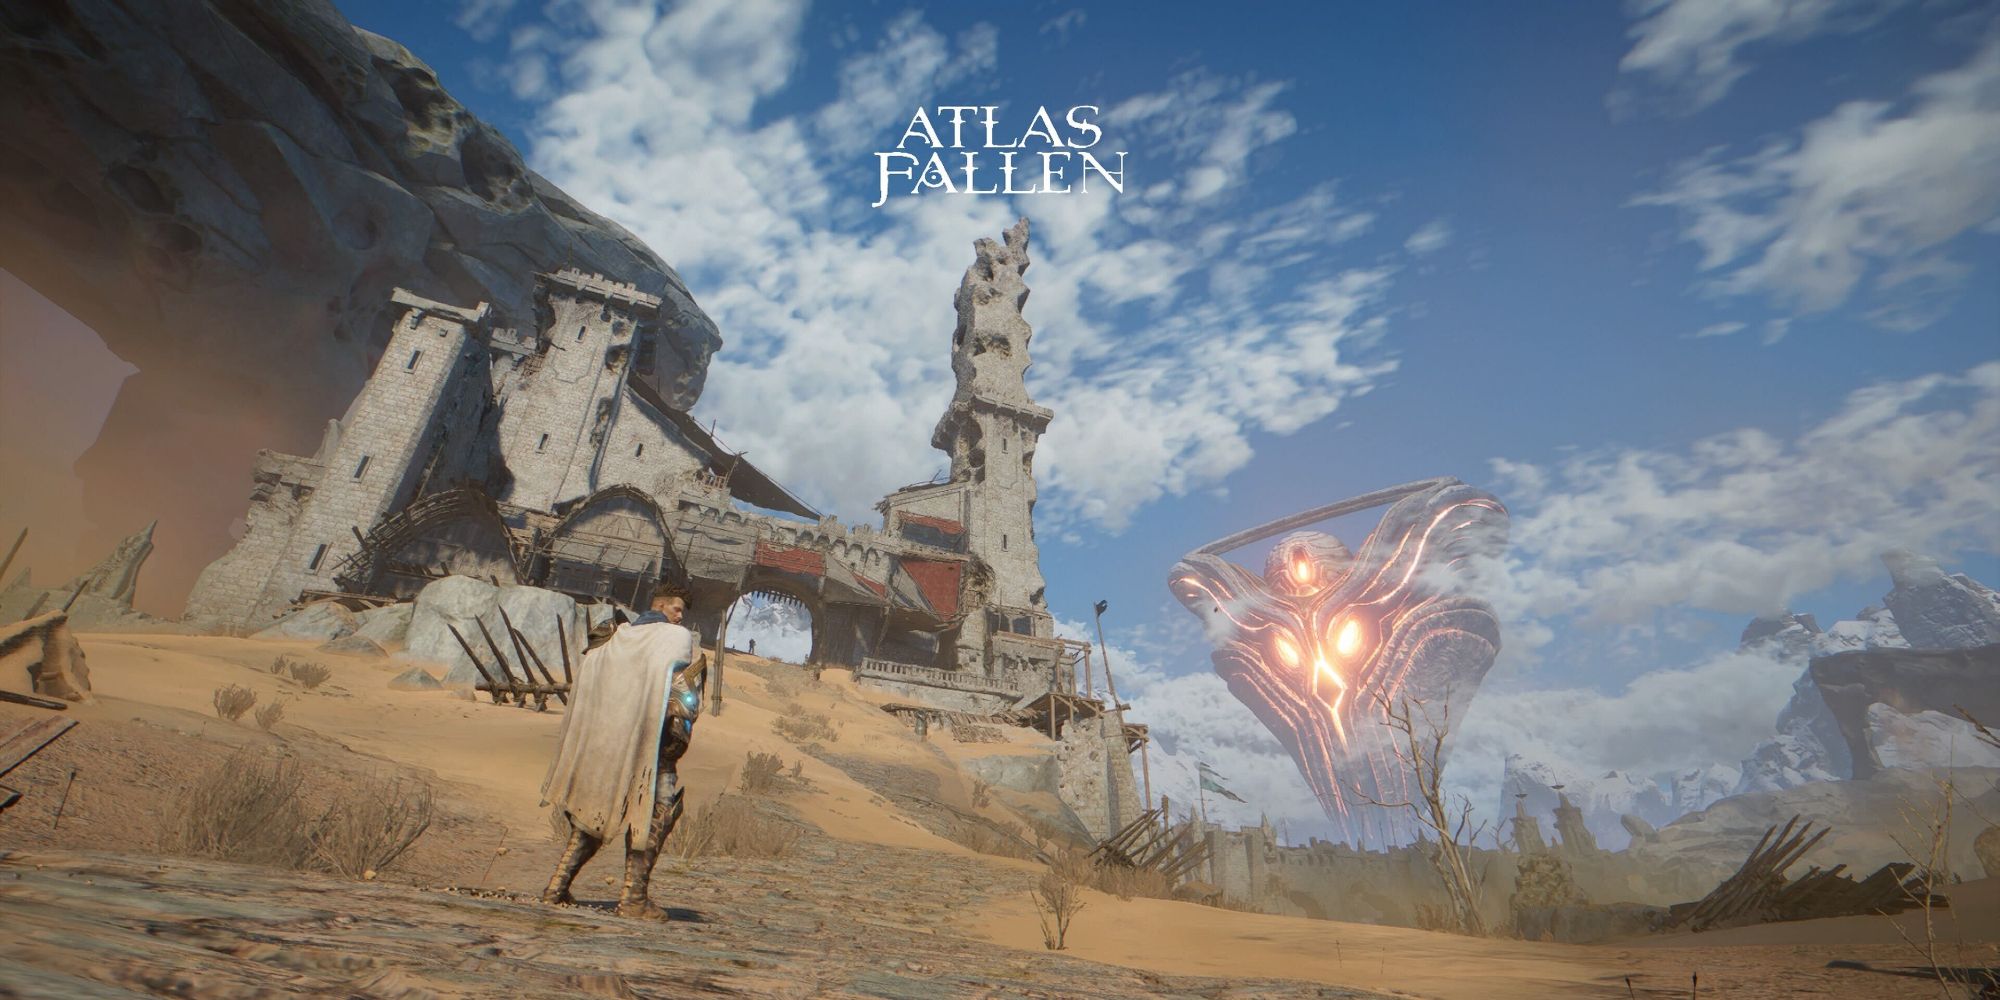 The main character from Atlas Fallen with the Watcher in the background